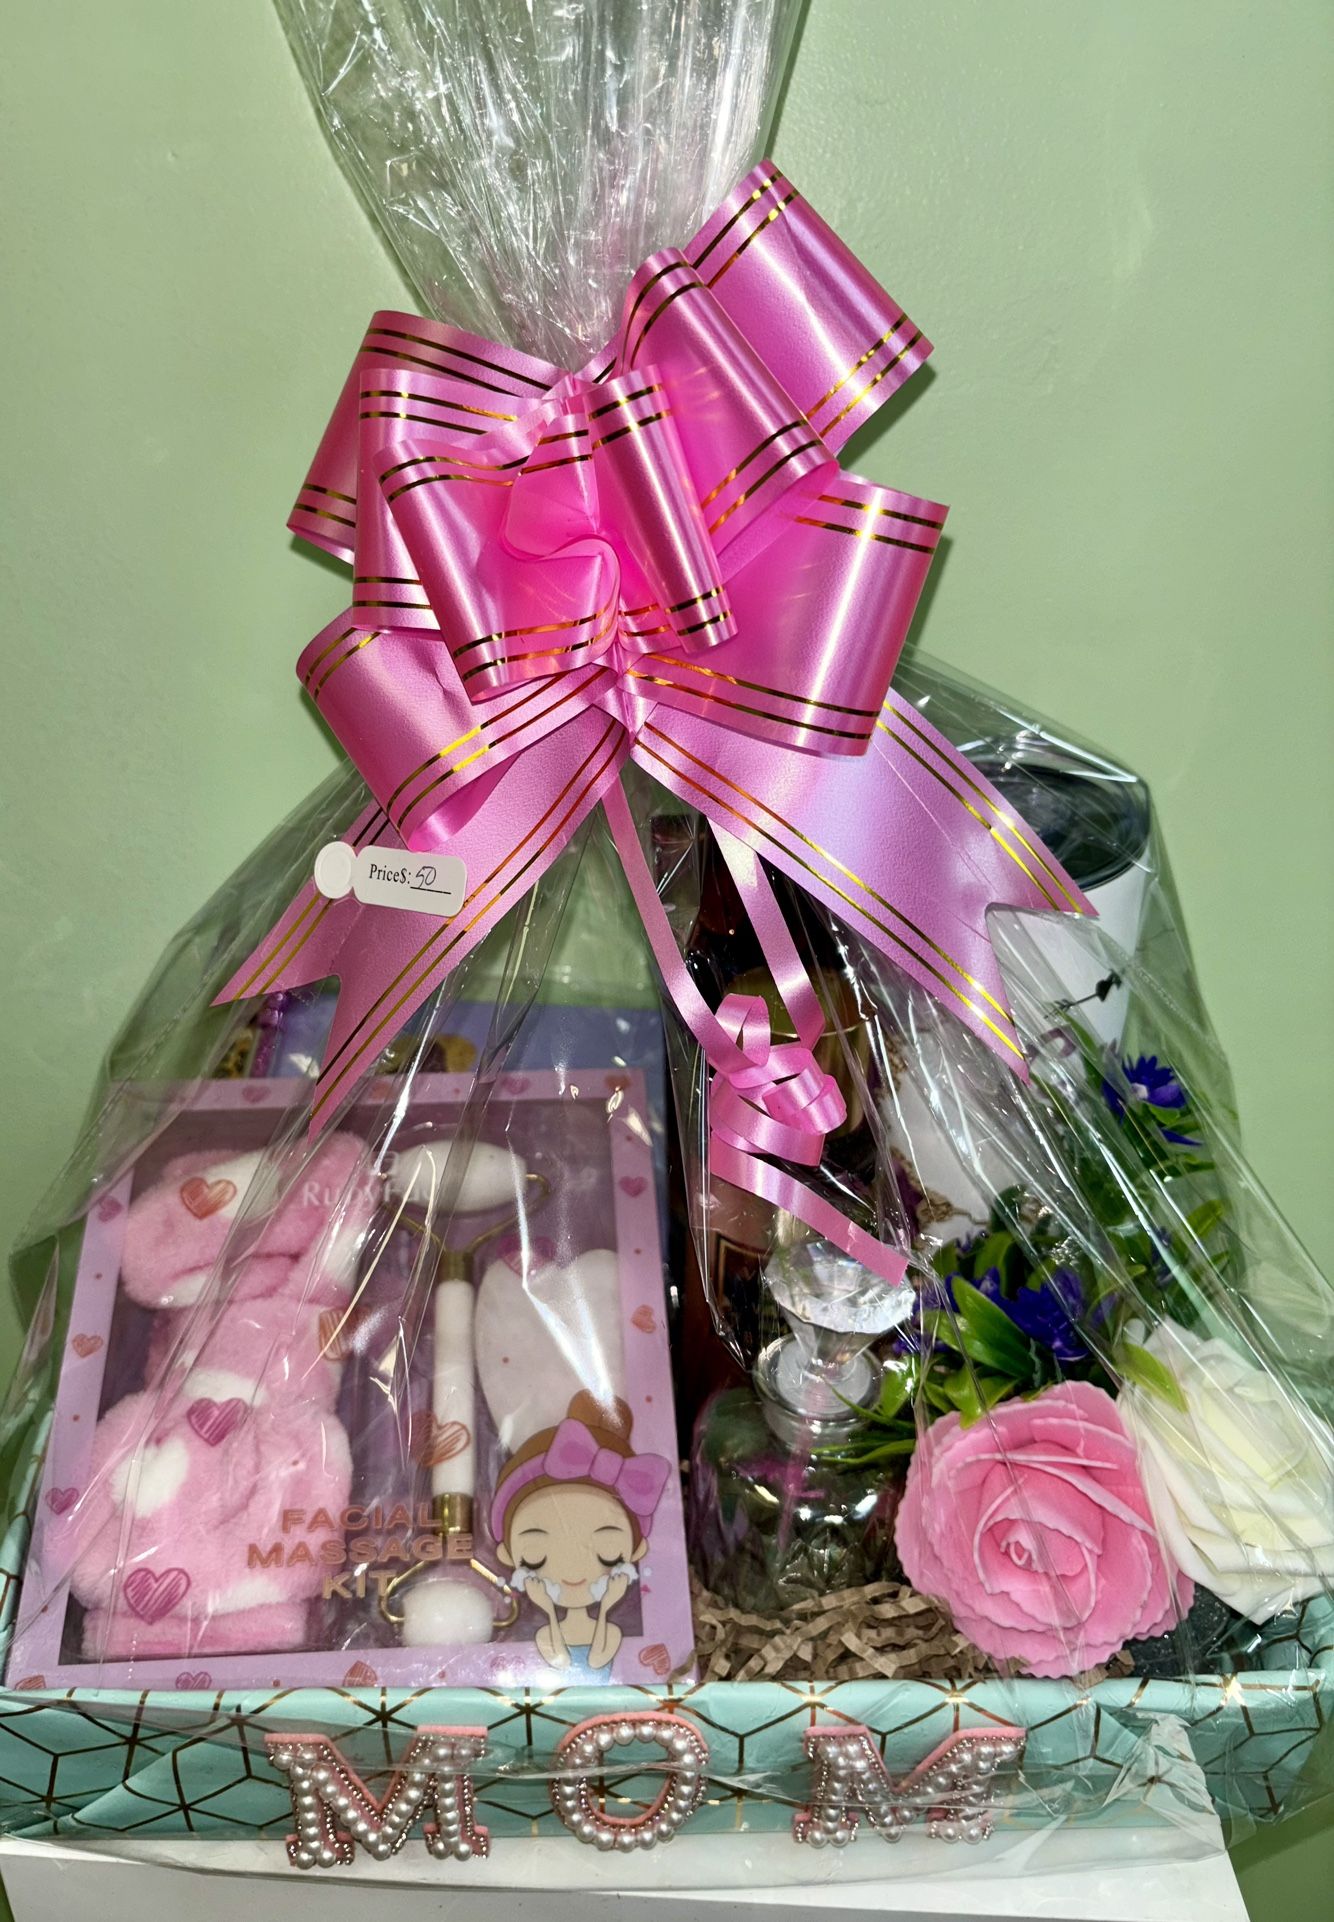 Gifts, Gift Baskets, Rose Bears, Candles, Flowers & Balloons Starting Low As $10!